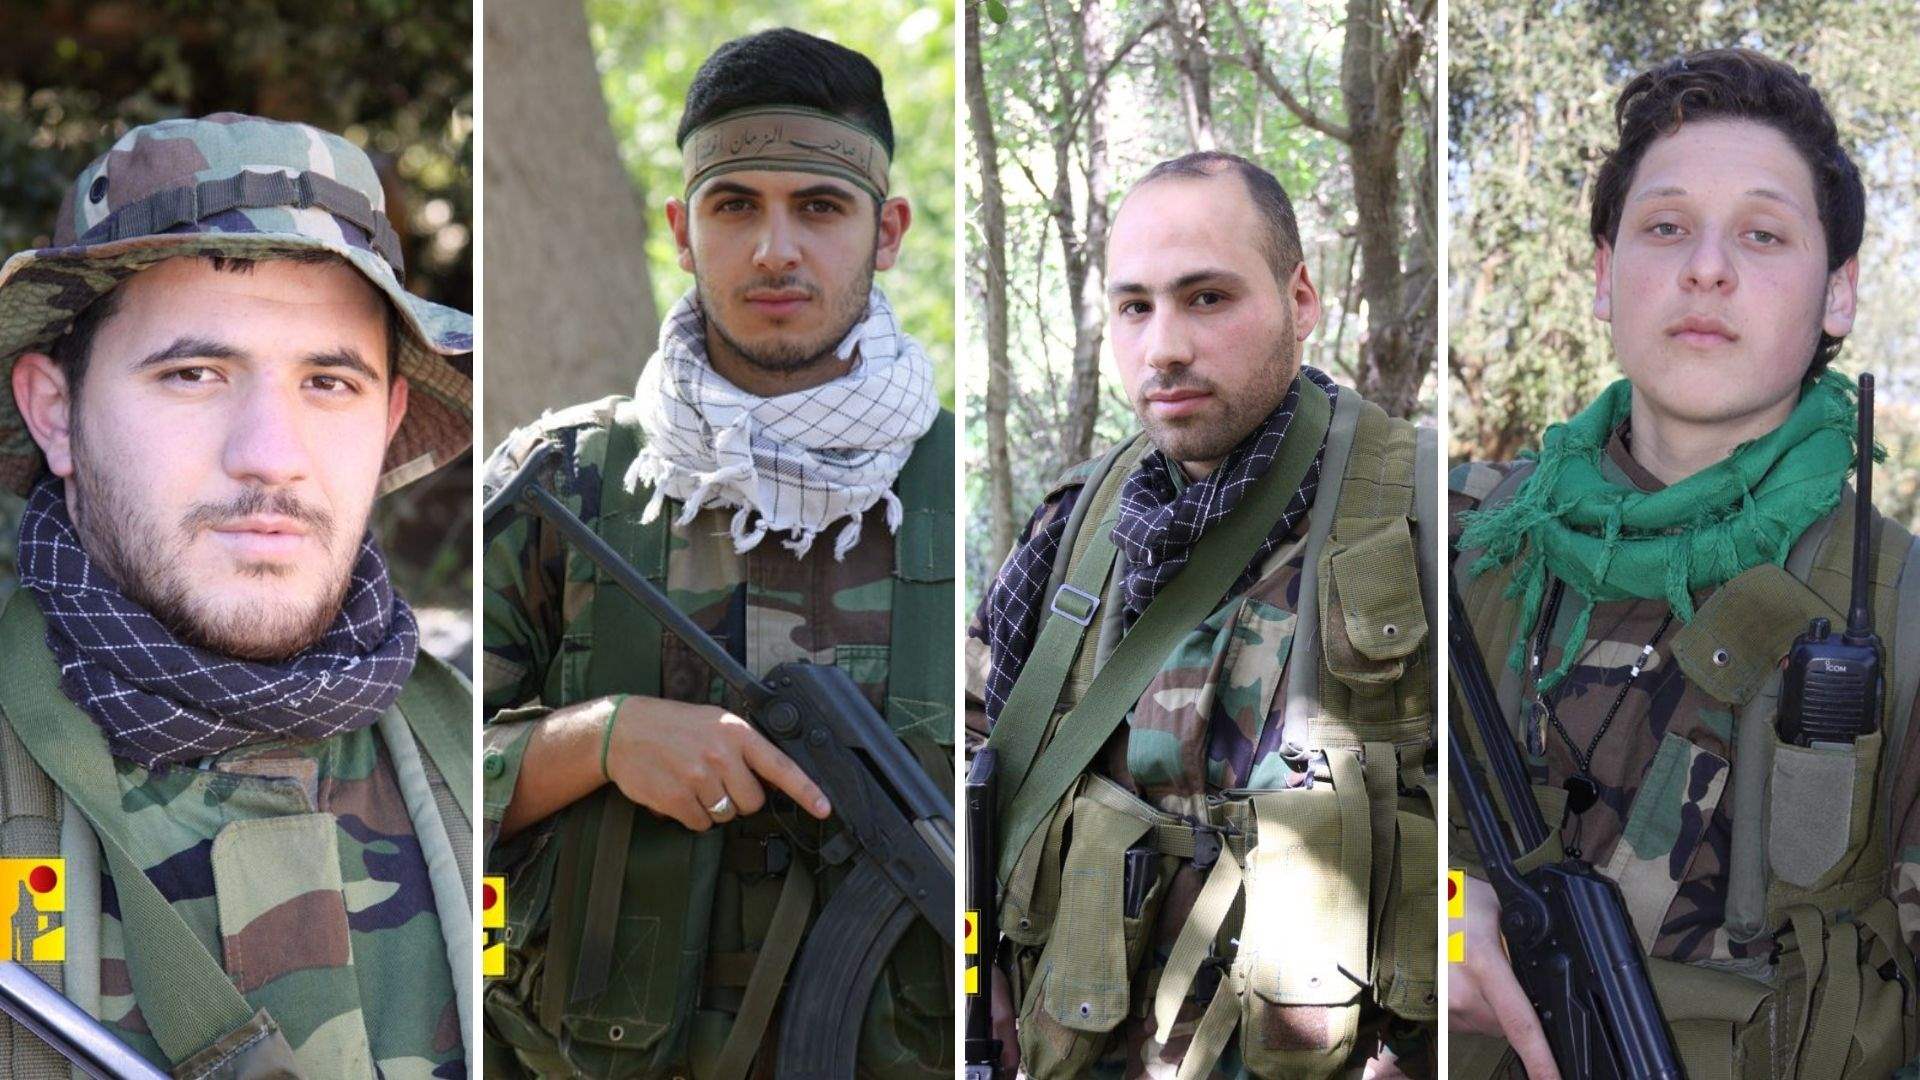 Islamic Resistance mourns four of its martyrs. Here are the details